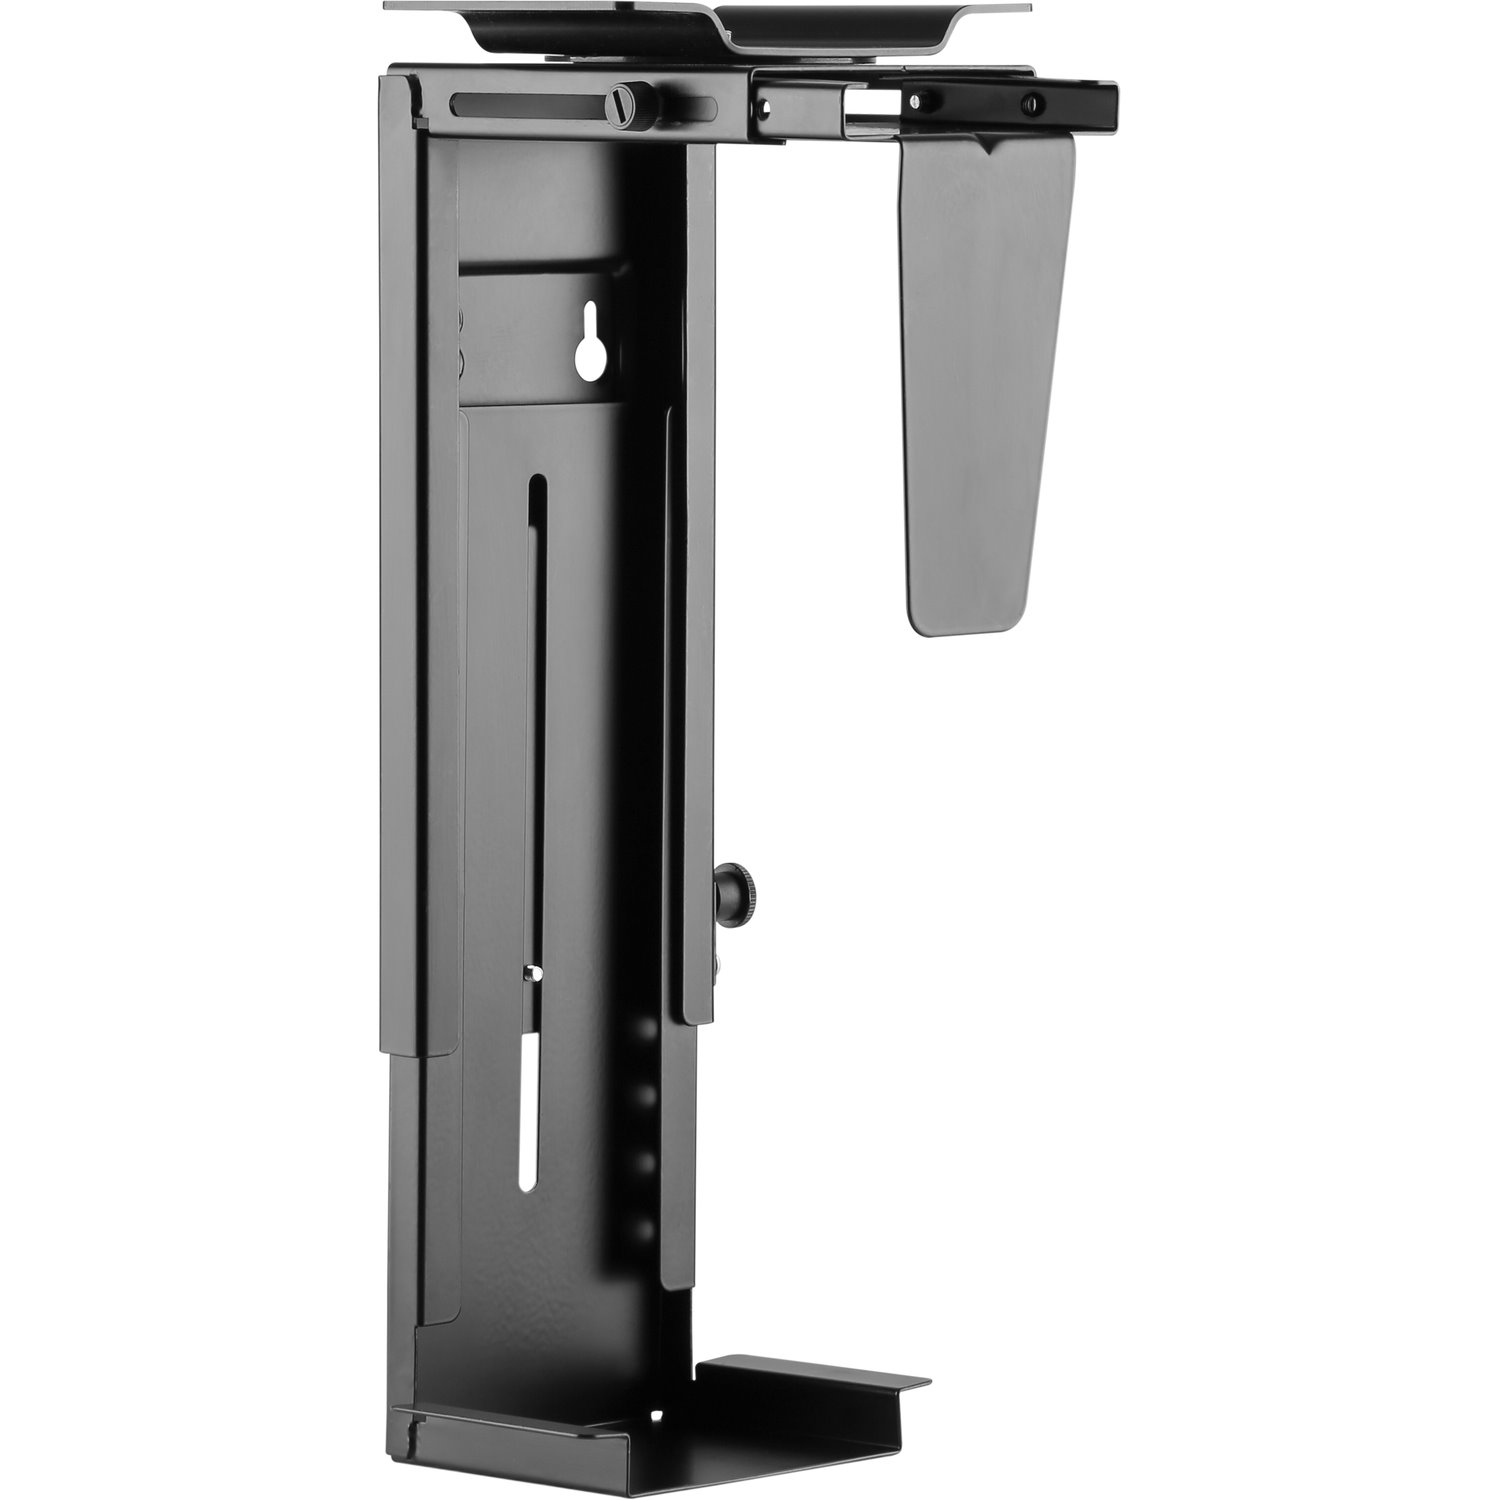 Newstar Swivel Under Desk & On-Wall PC Mount (Suitable PC Dimensions - Height: 30-53 cm / Width: 9-20 cm) - Black